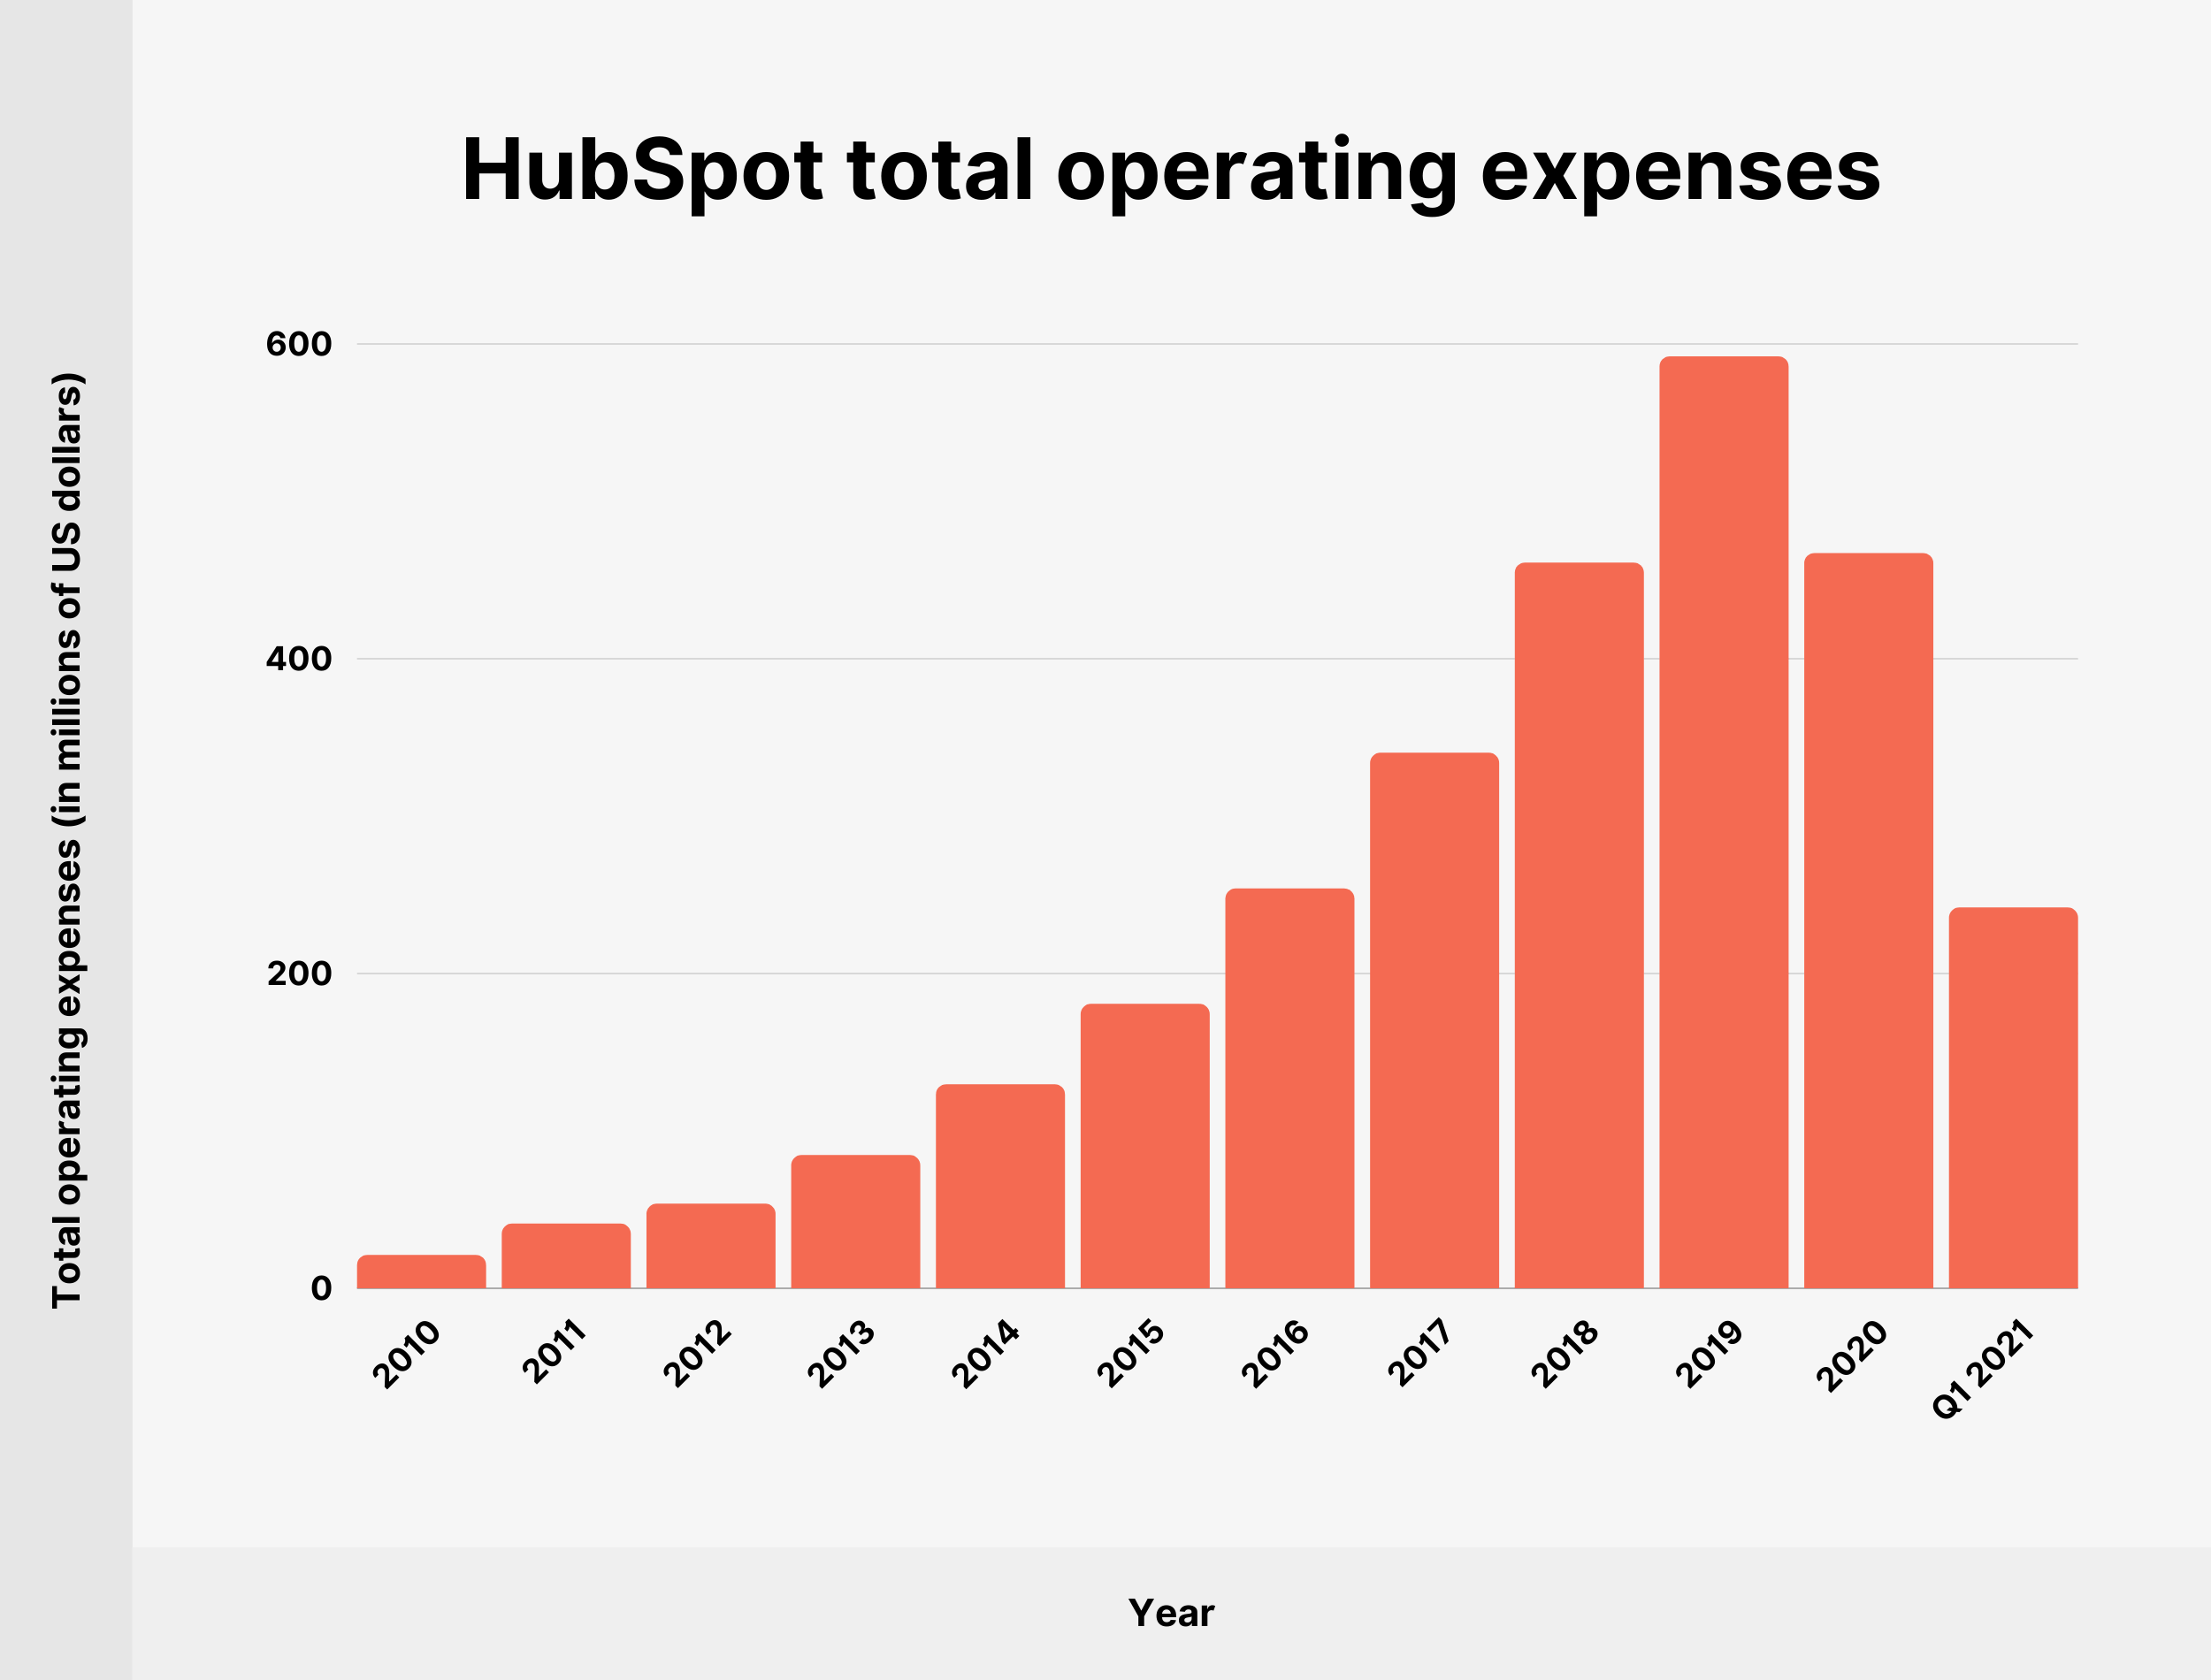 HubSpot total operating expenses